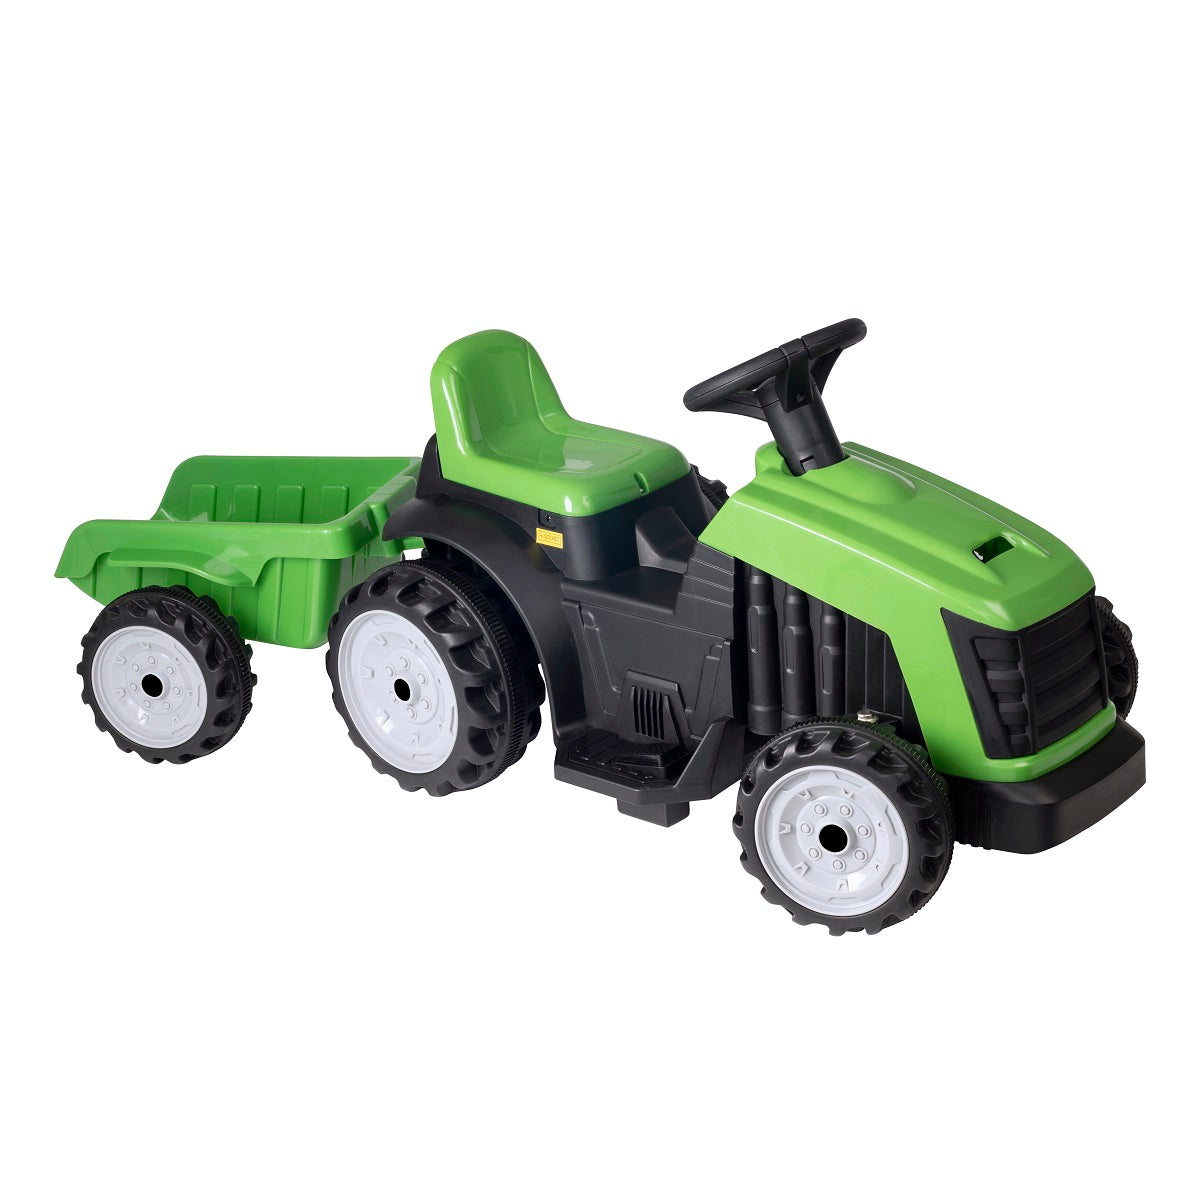 Evo-Battery-Operated-Ride-On-Tractor-With-Trailer